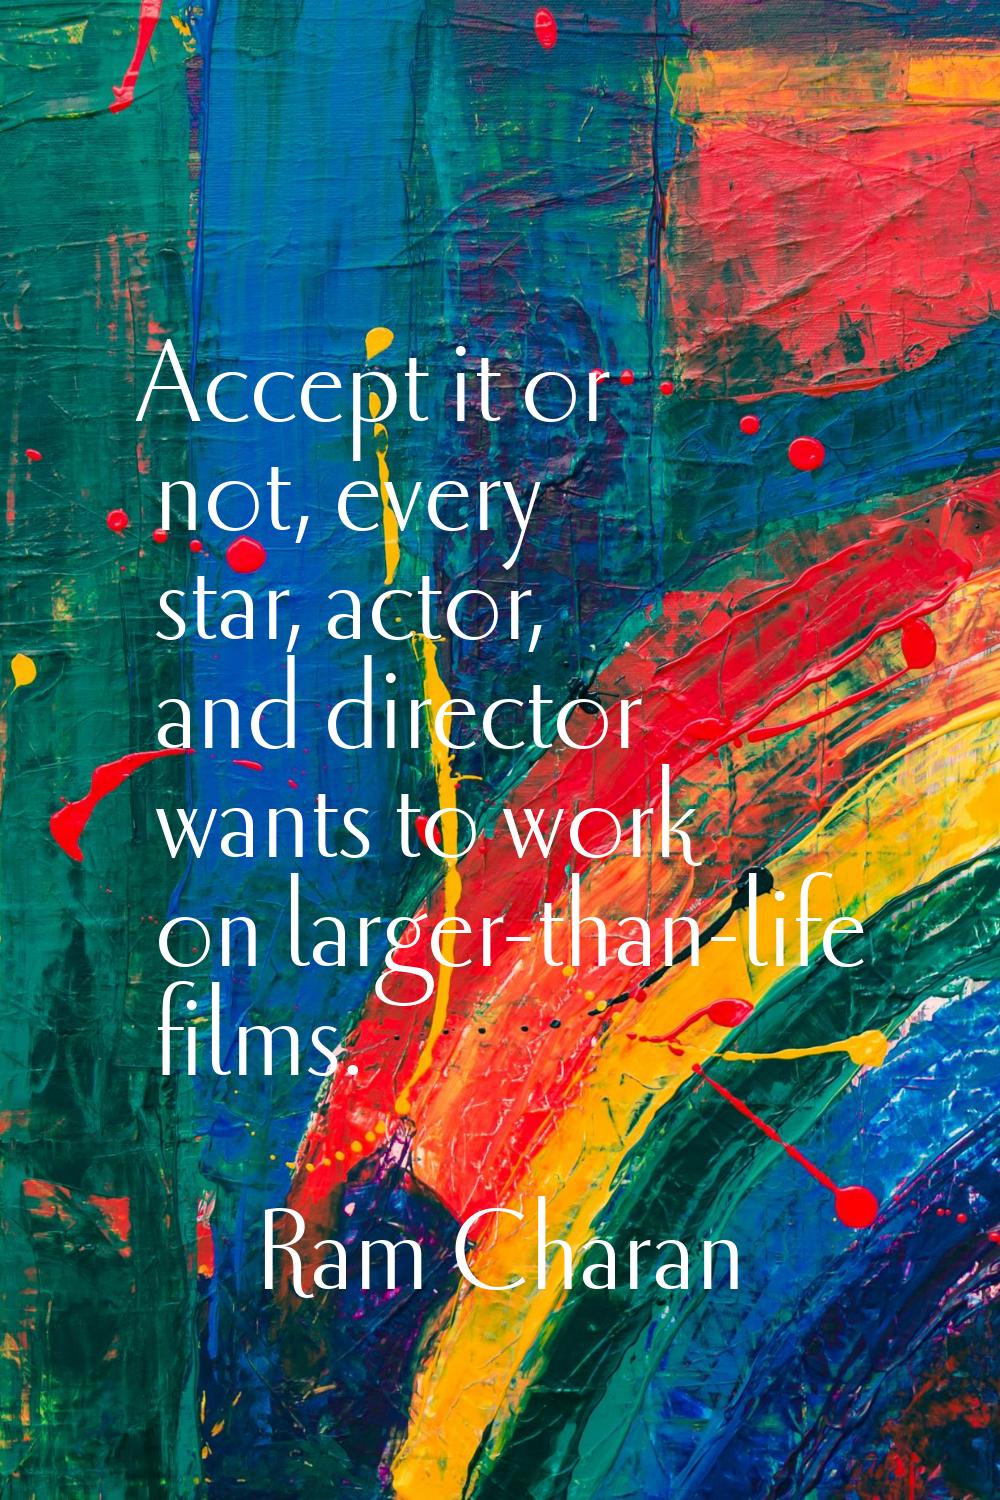 Accept it or not, every star, actor, and director wants to work on larger-than-life films.